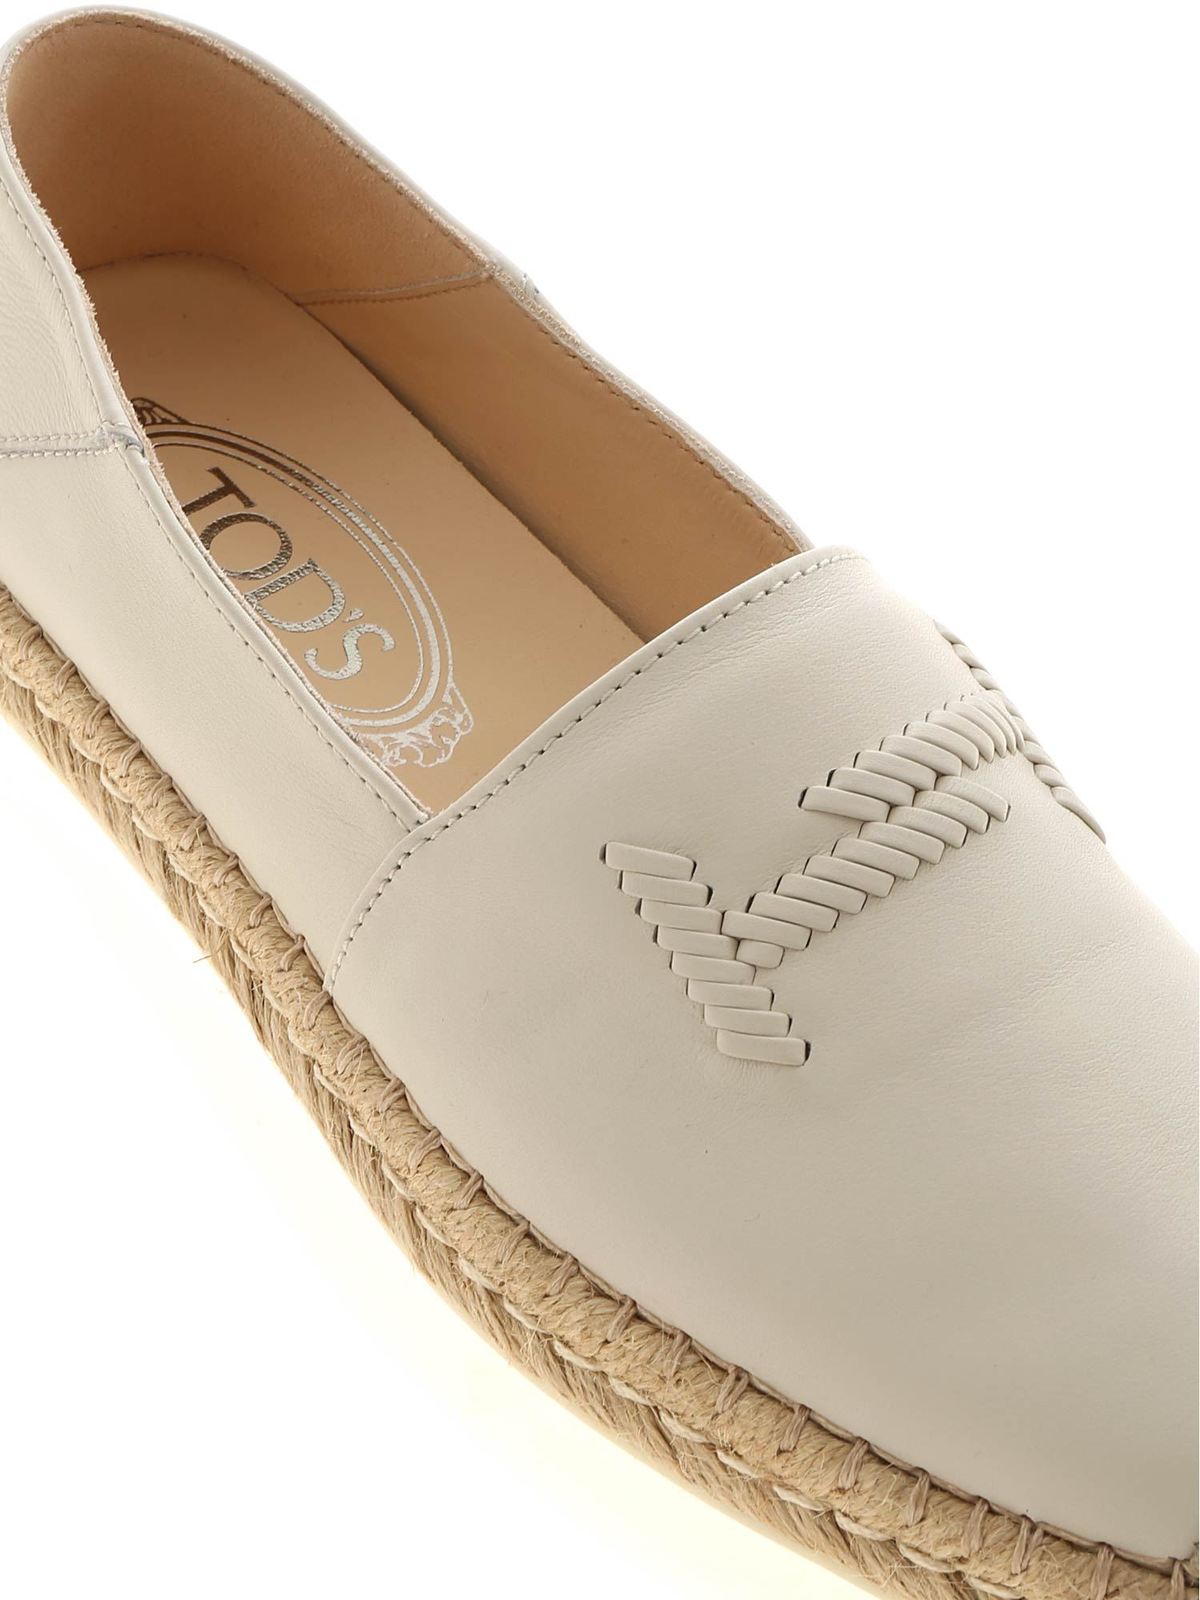 Espadrilles Tod'S - Embroidered toe espadrilles in white ...